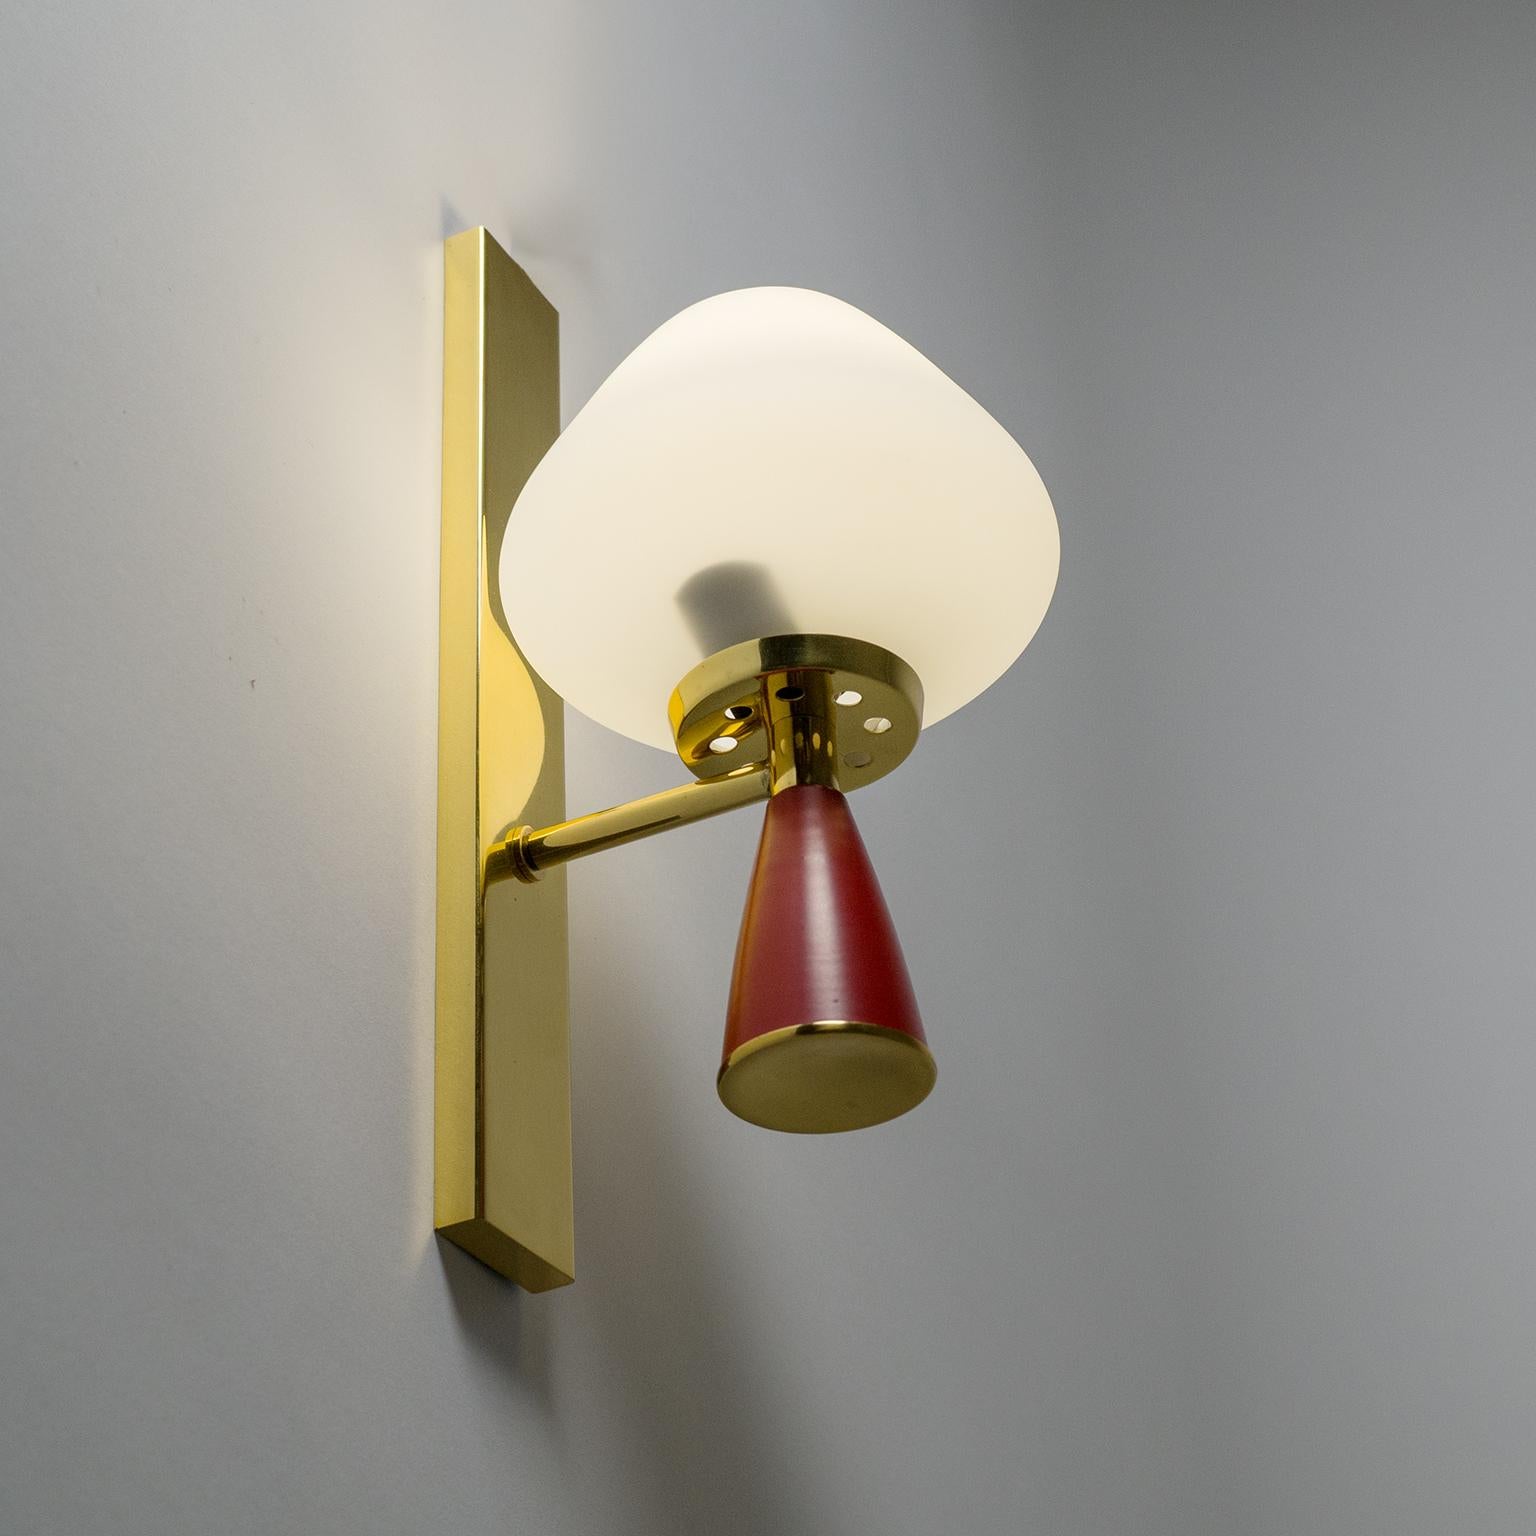 Aluminum Italian Satin Glass Sconces, 1950s, Brass and Red